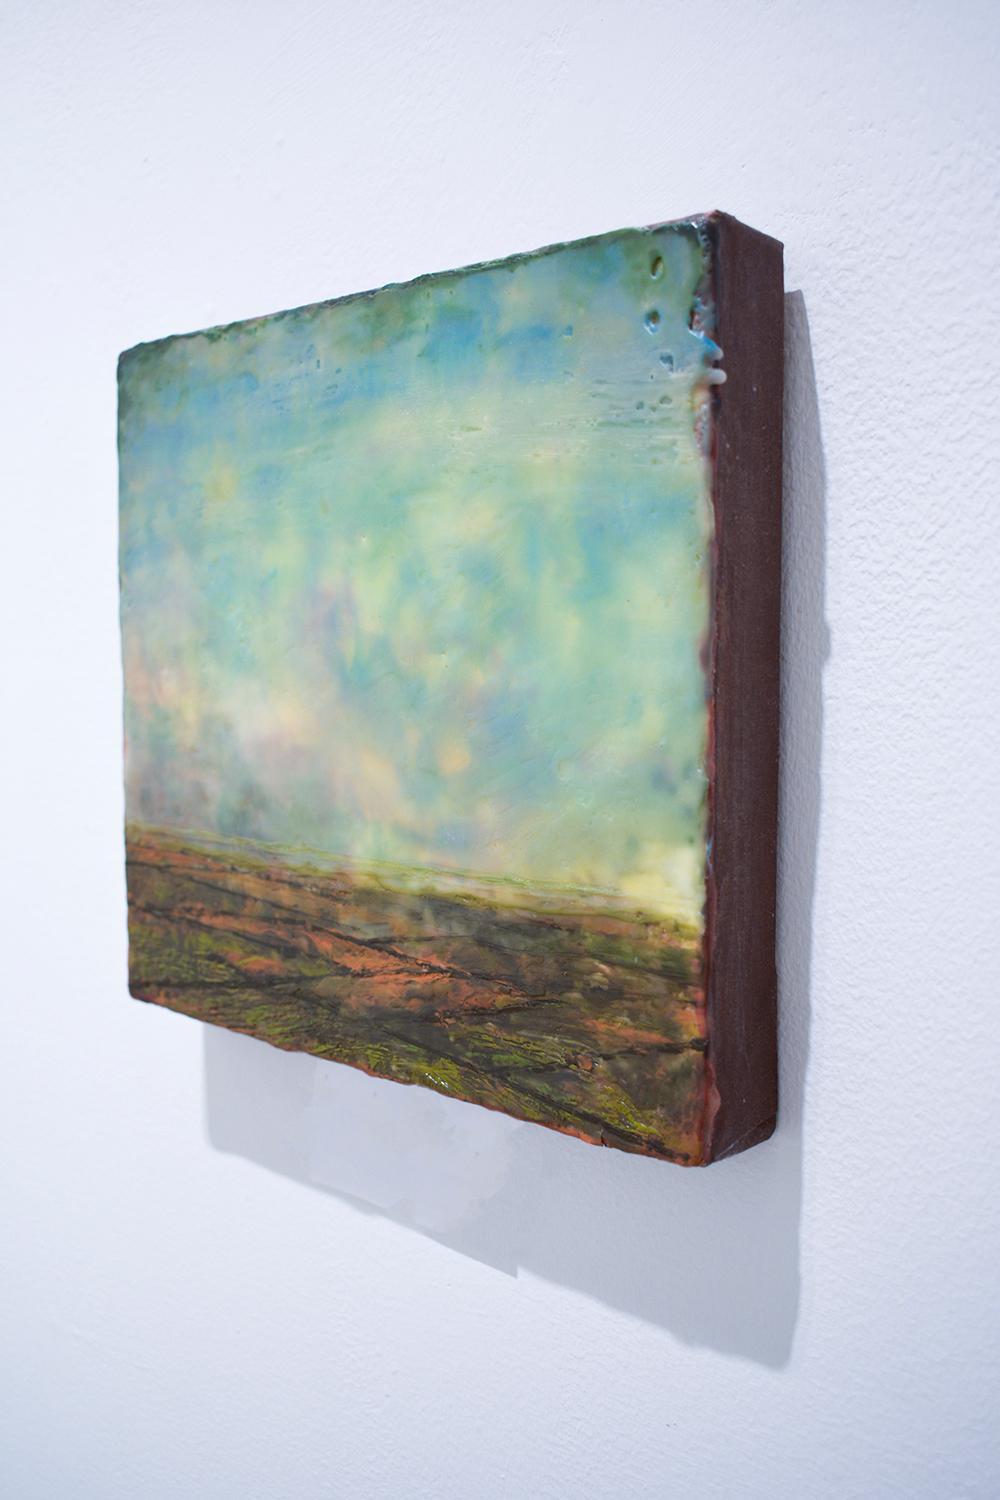 Hudson River School style encaustic landscape painting of a green and orange country field with an expansive teal and soft yellow sky 
Untitled IV, painted with encaustic by Leigh Palmer in 2020 
8 1/2